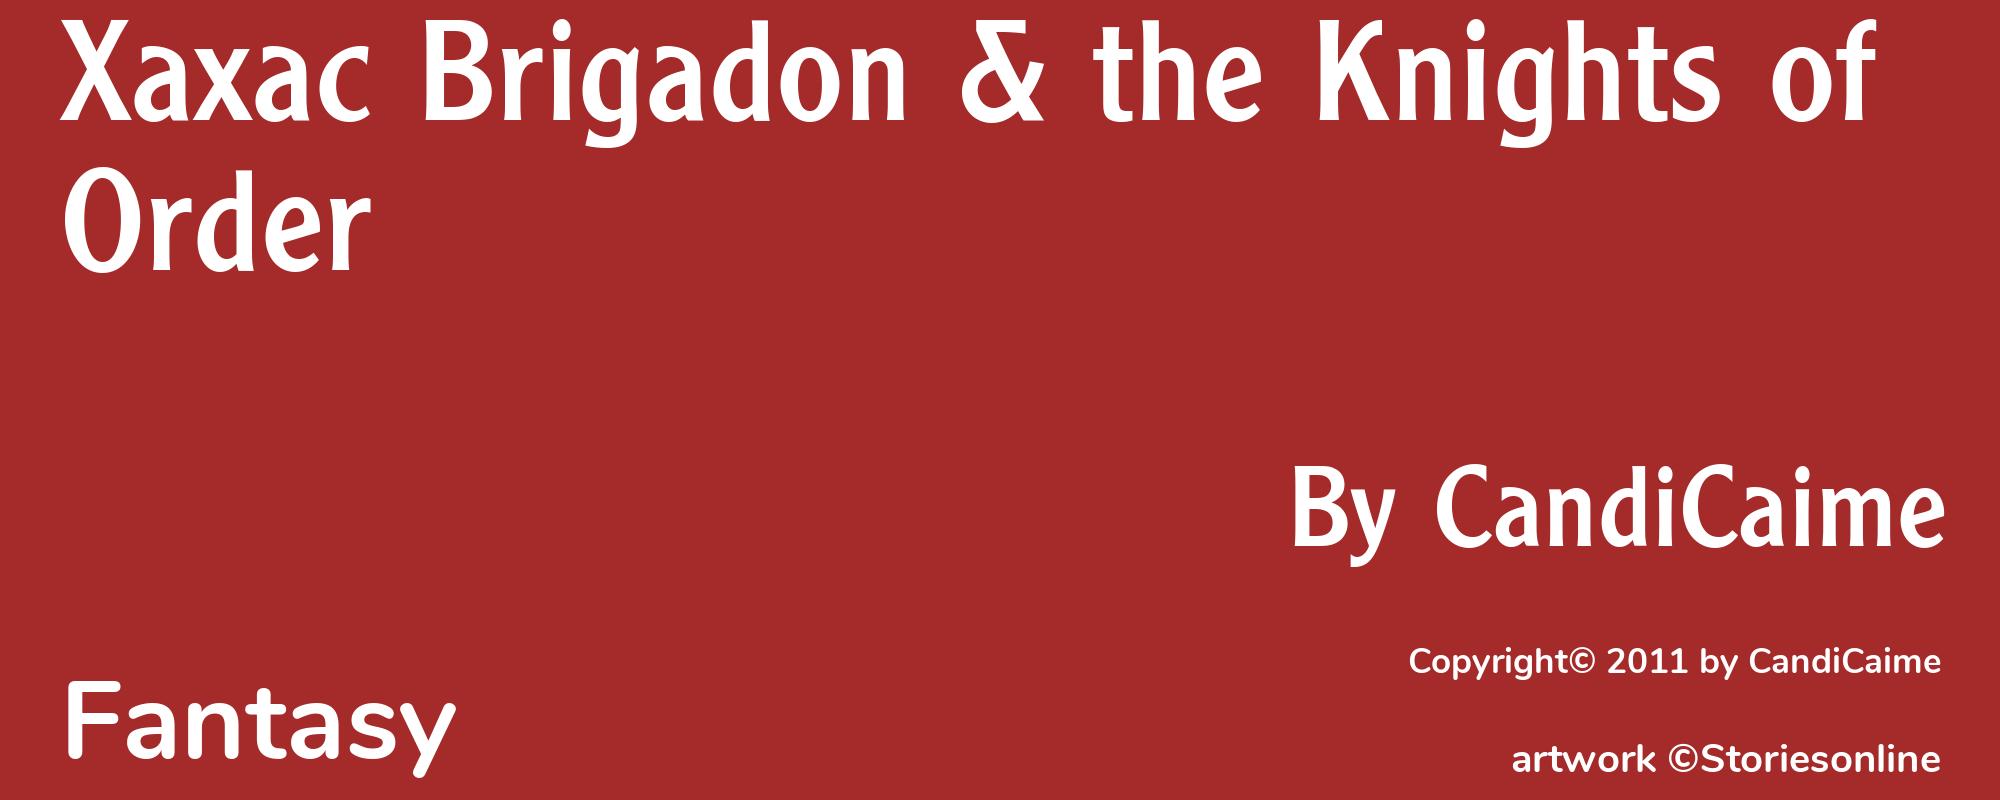 Xaxac Brigadon & the Knights of Order - Cover